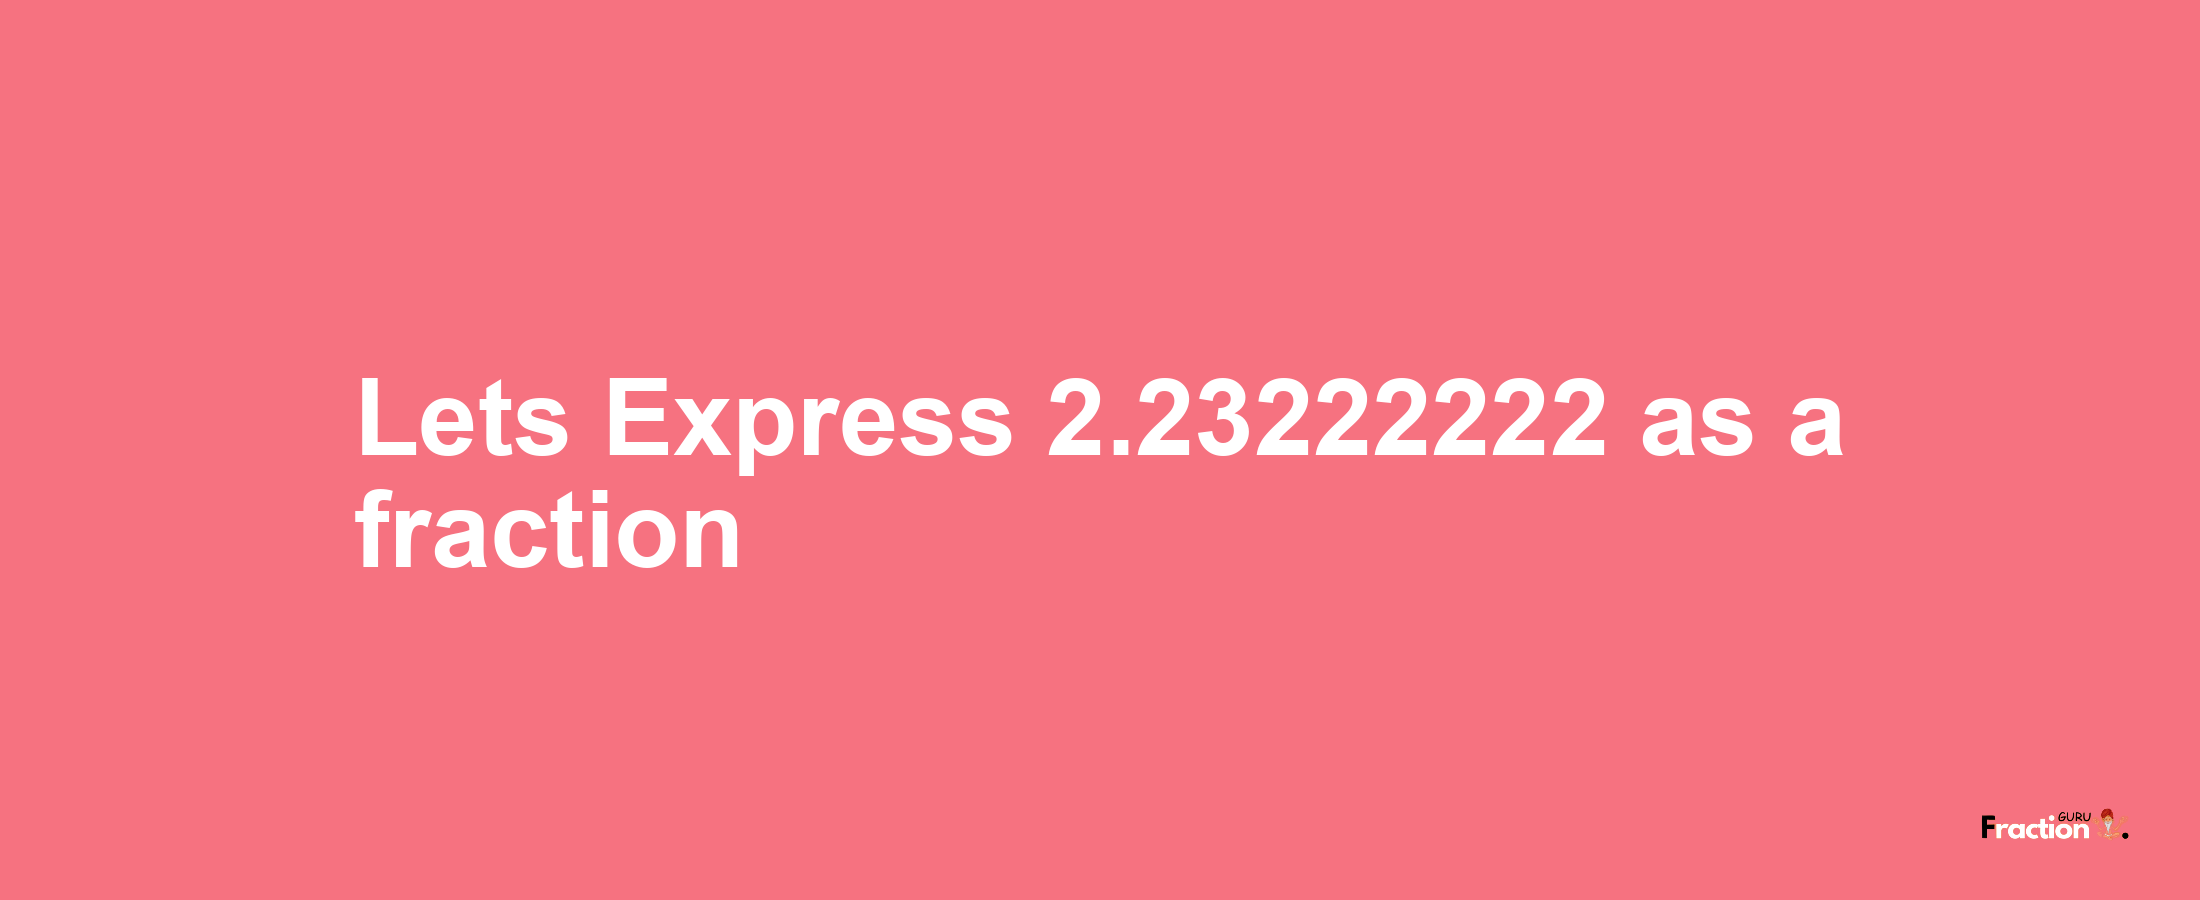 Lets Express 2.23222222 as afraction